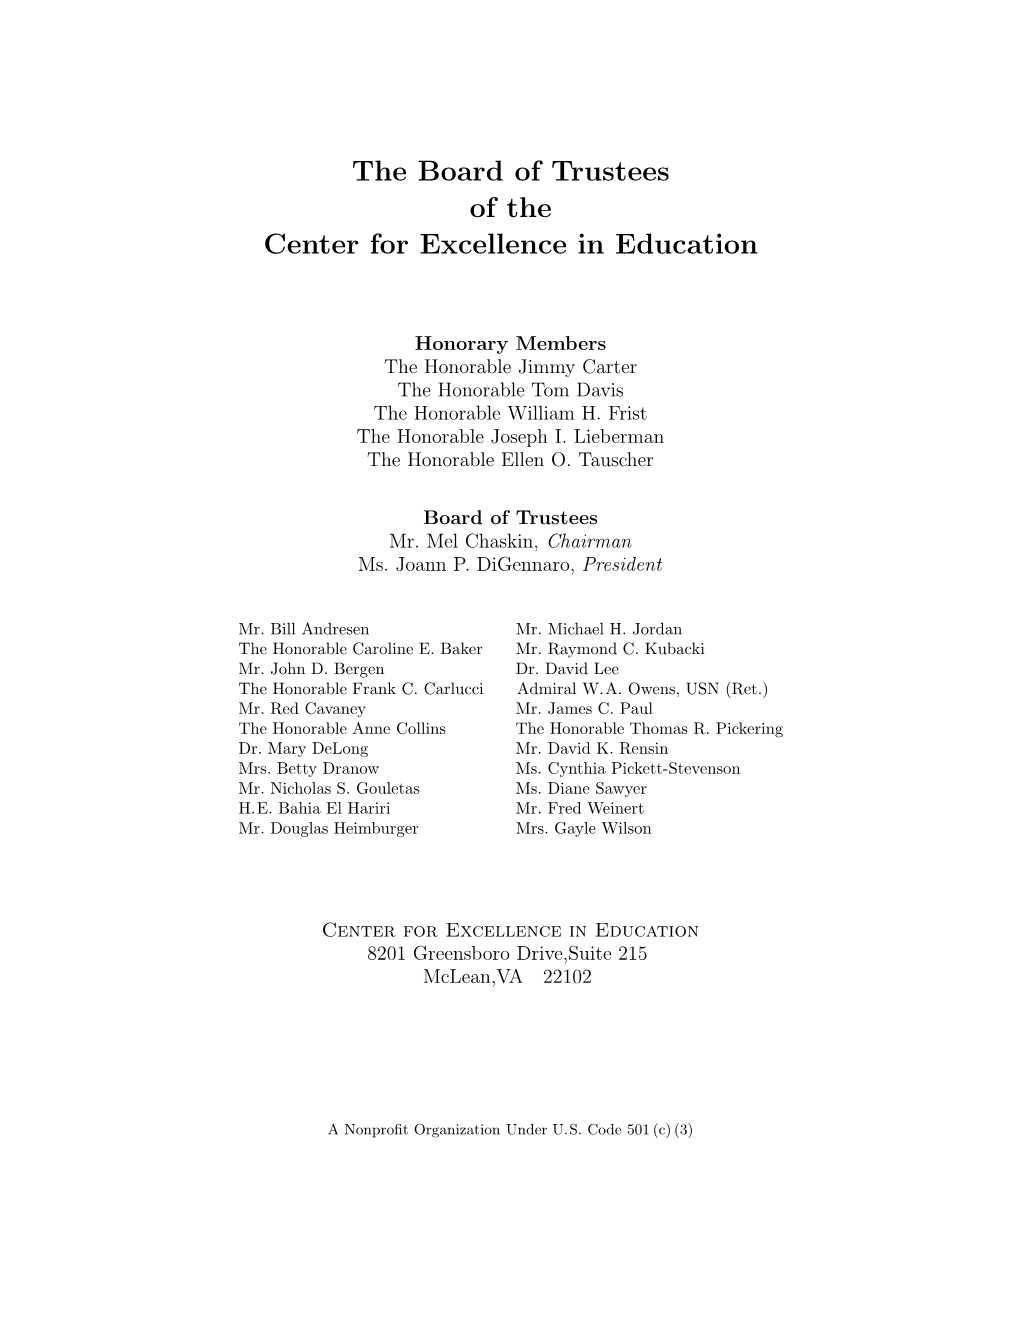 The Board of Trustees of the Center for Excellence in Education